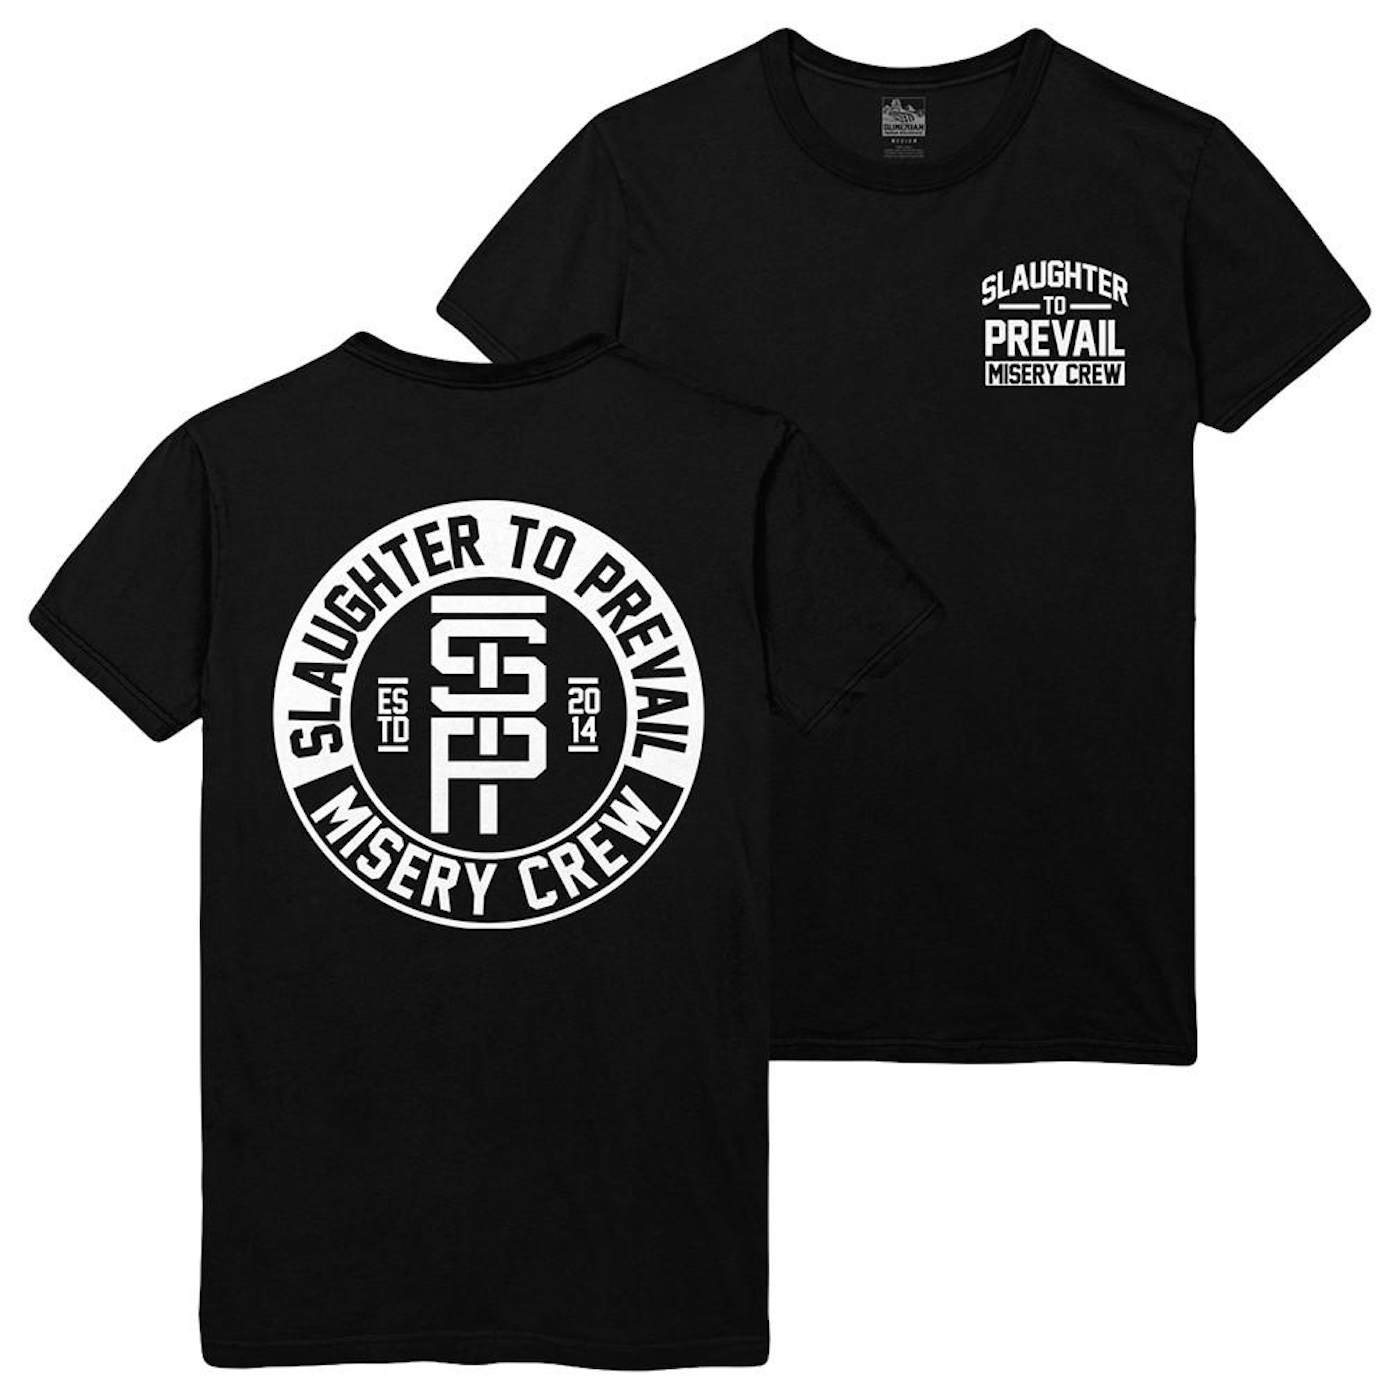 Slaughter To Prevail - Misery Crew Tee